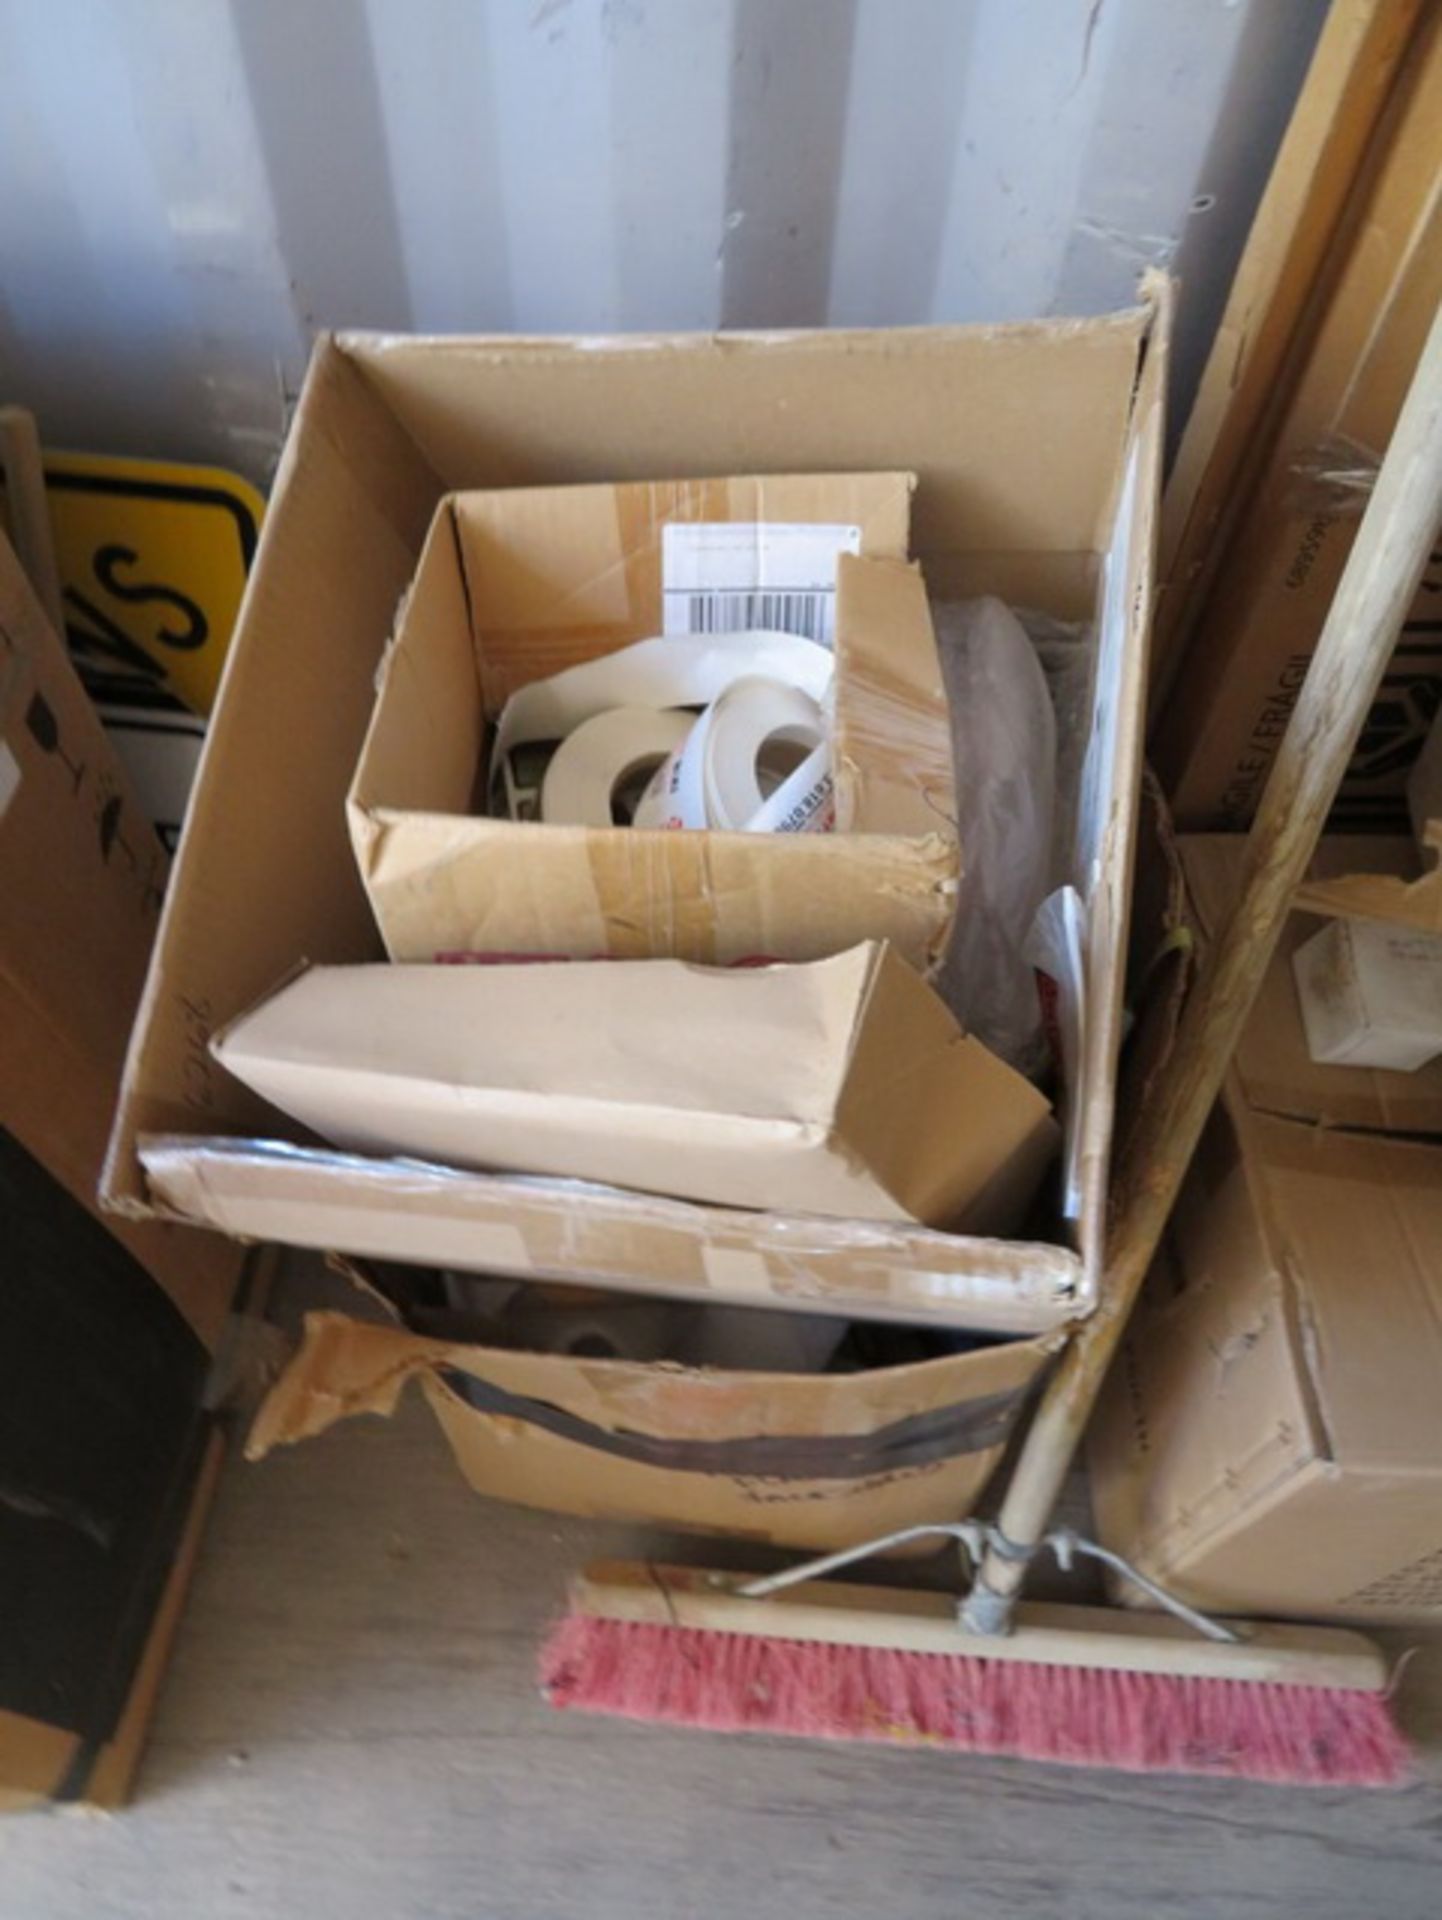 Contents of Shipping Container. To Include 1/2" PVDF Tubing, Safety Glasses, Safety Signs, - Image 11 of 51